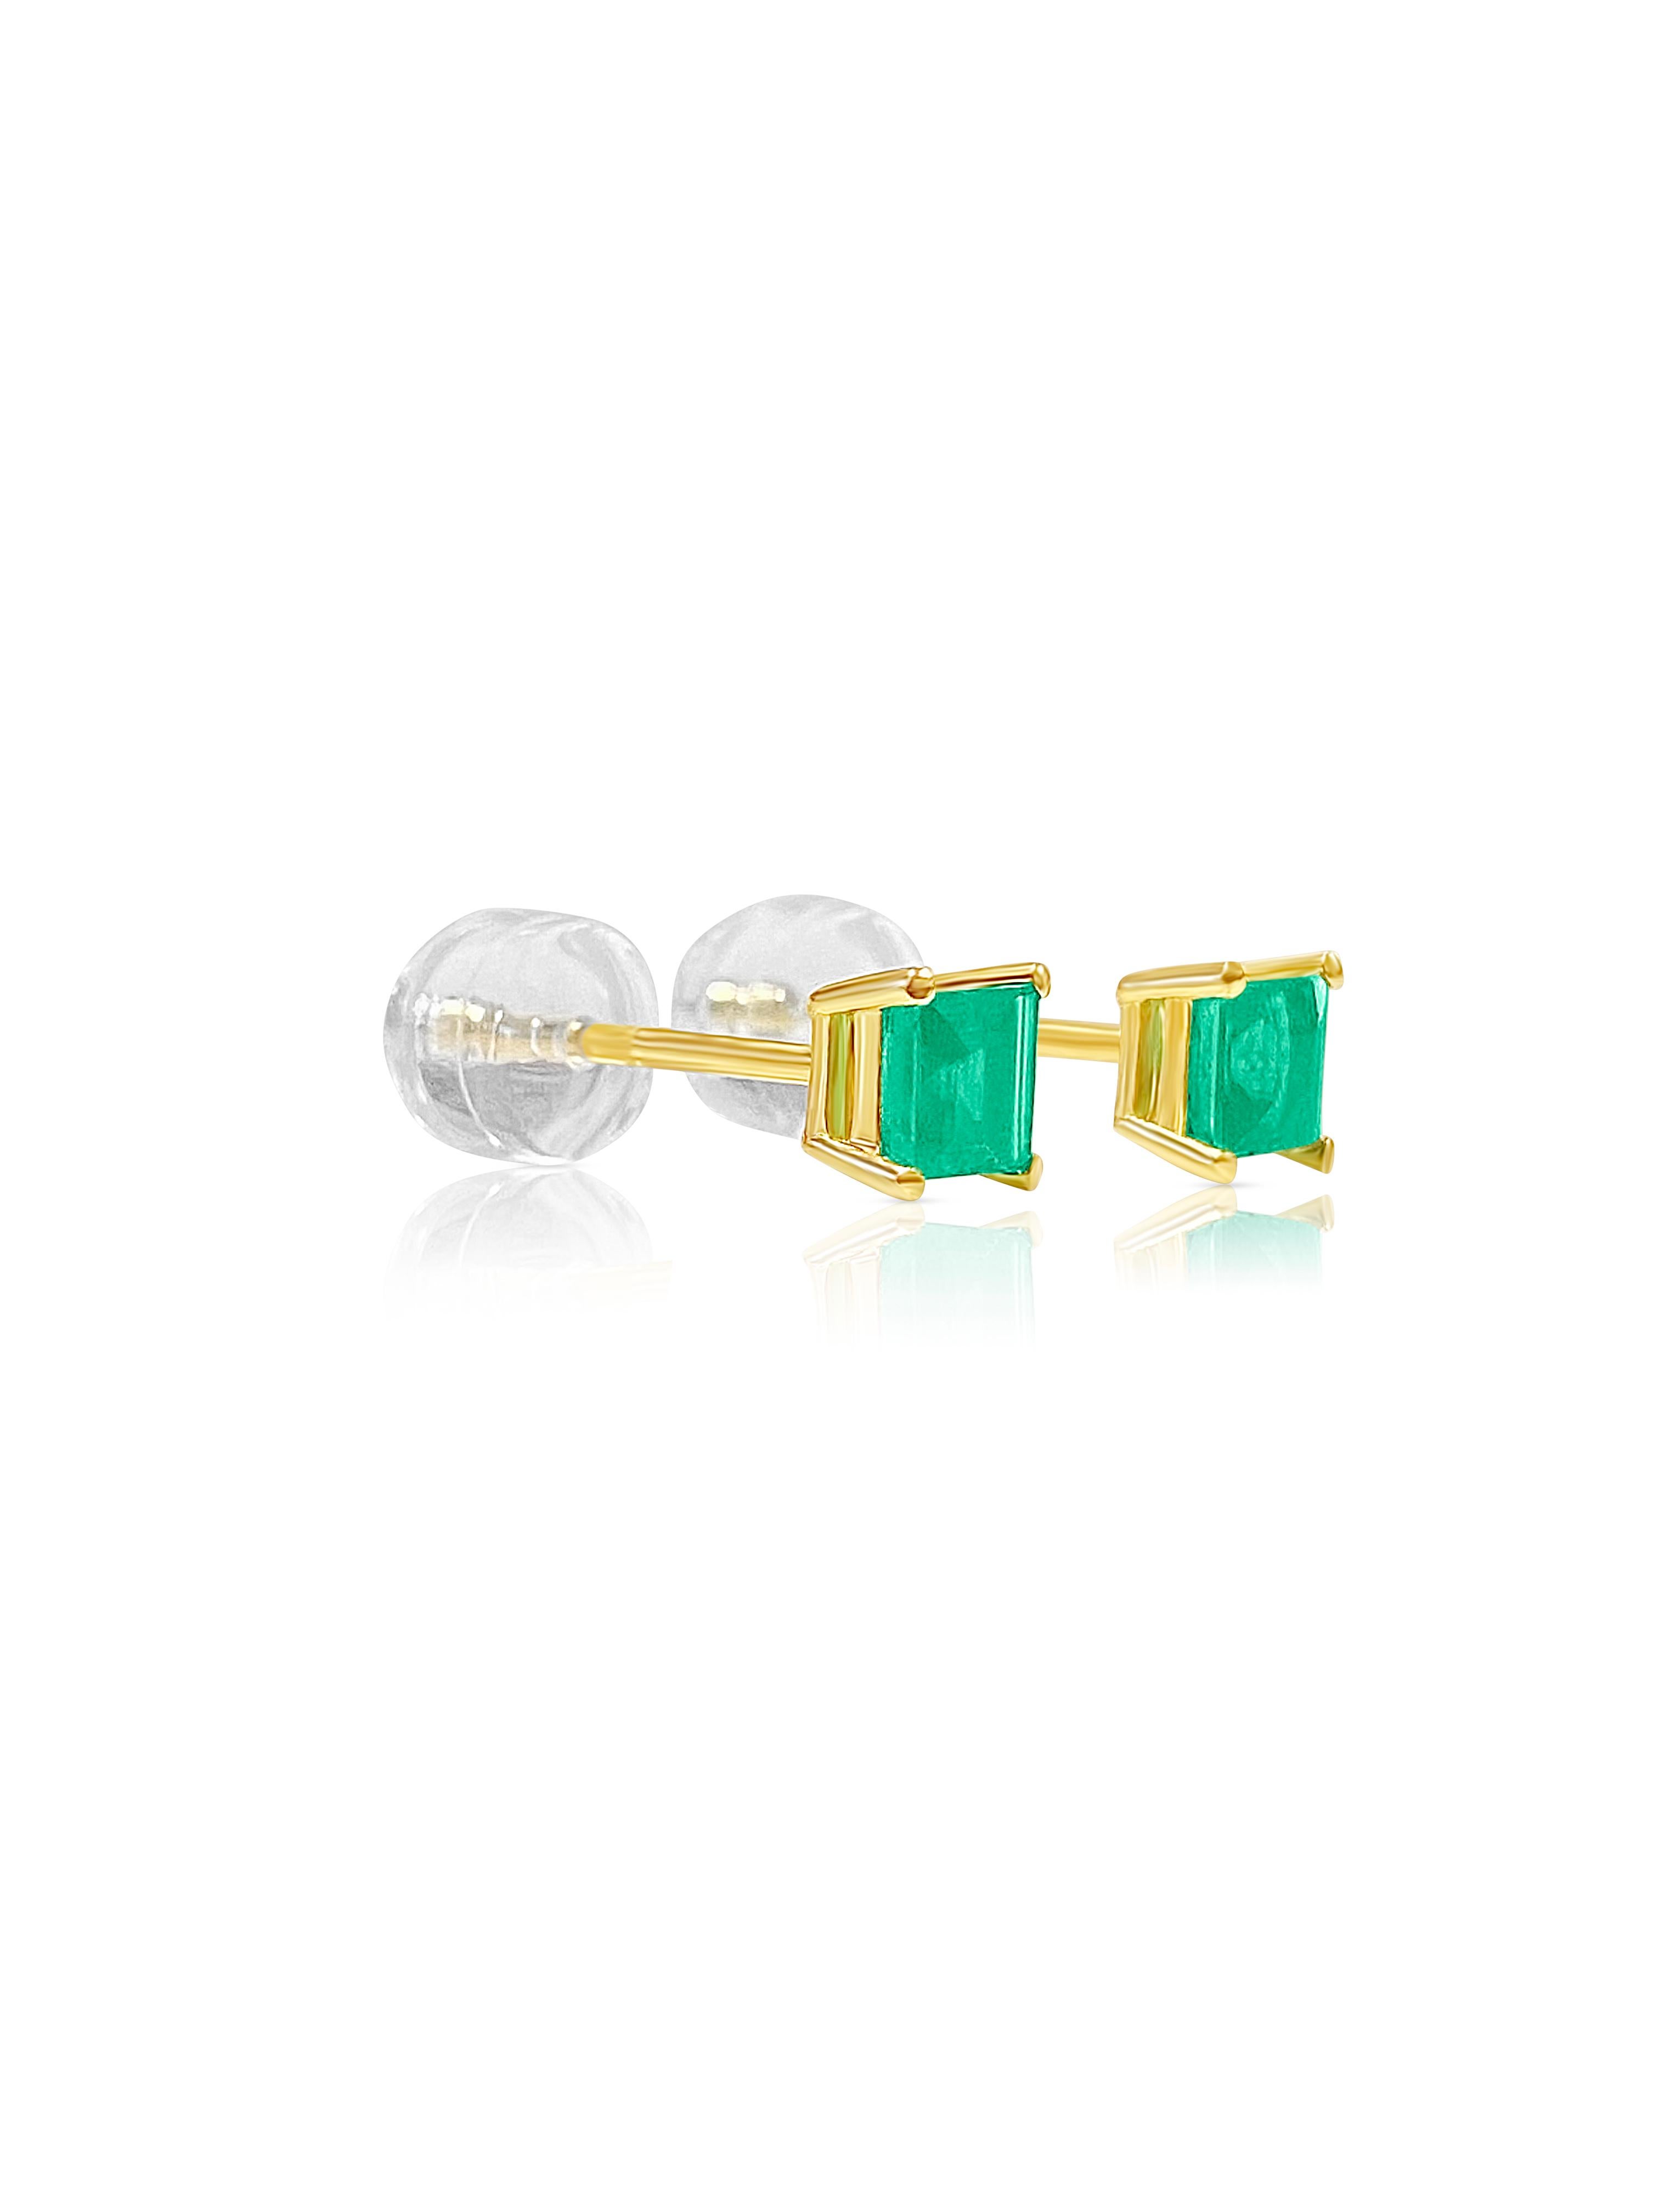 Emerald Cut Colombian Emerald Square-Cut Stud Earrings in 18k Yellow Gold For Sale